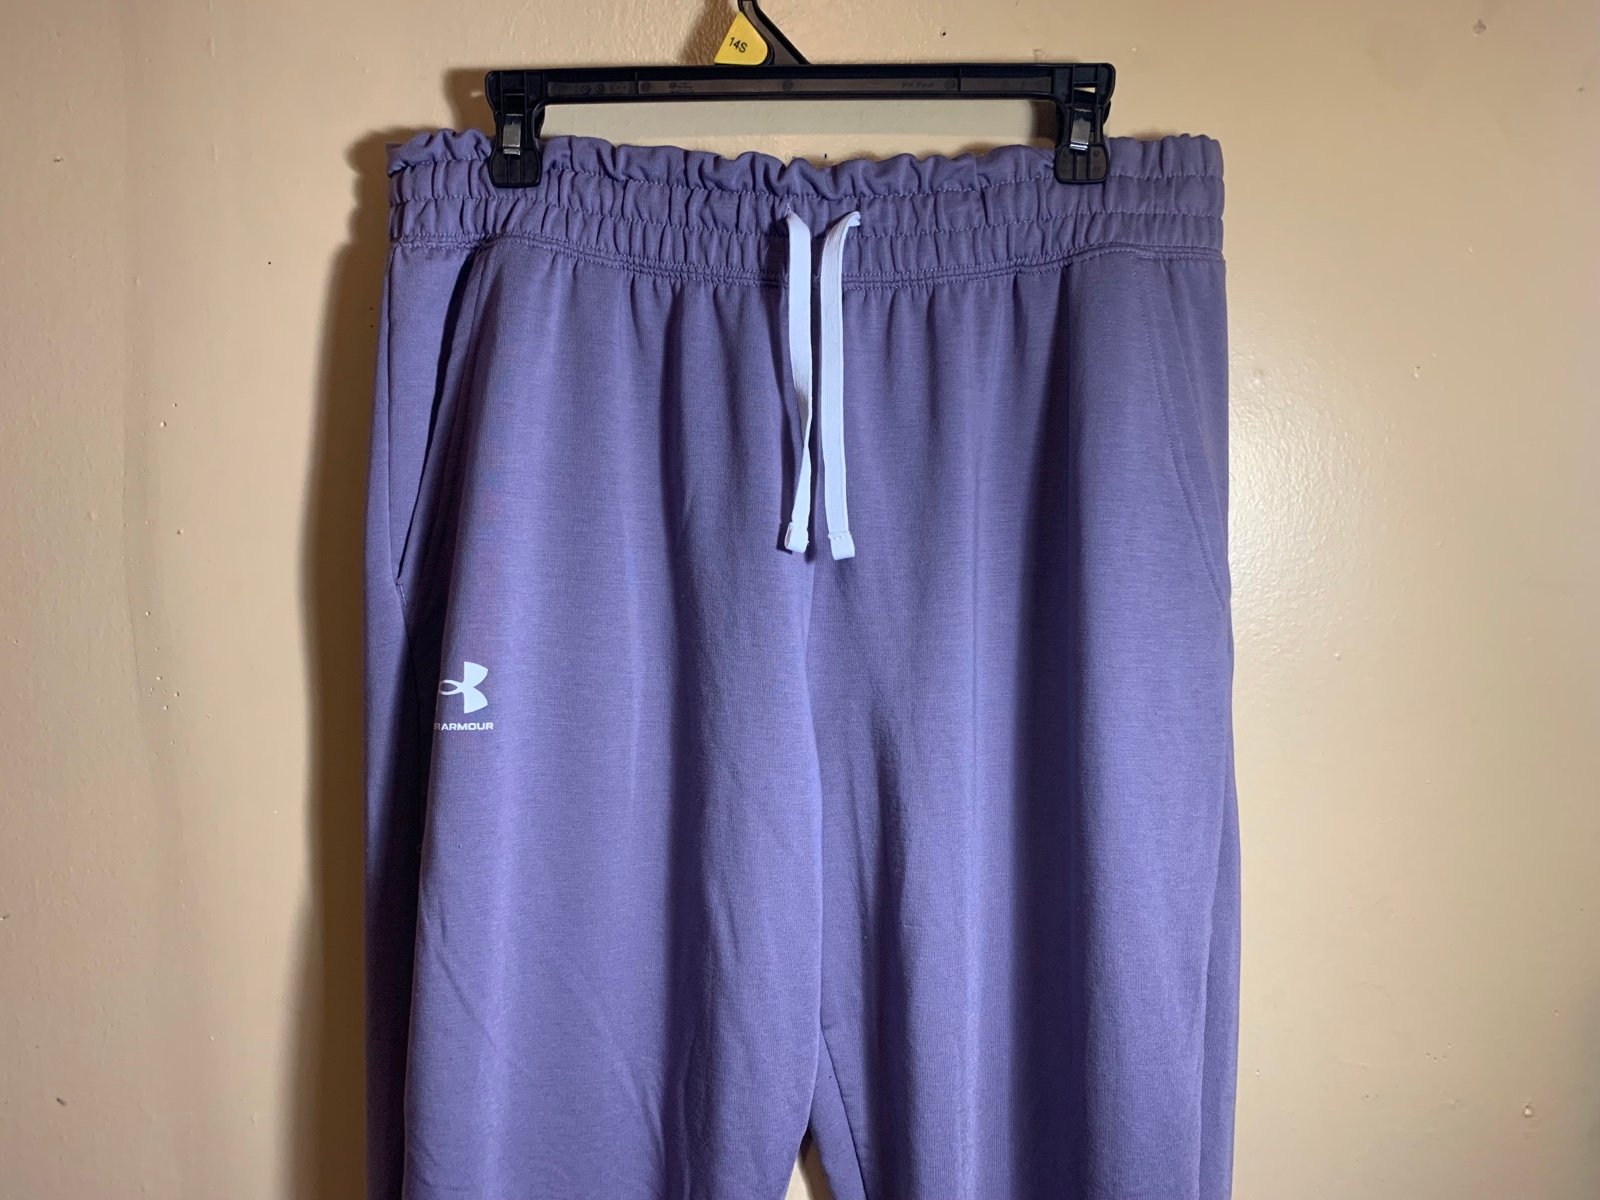 Simple Under Armour Joggers nKABhyg3R Factory Price